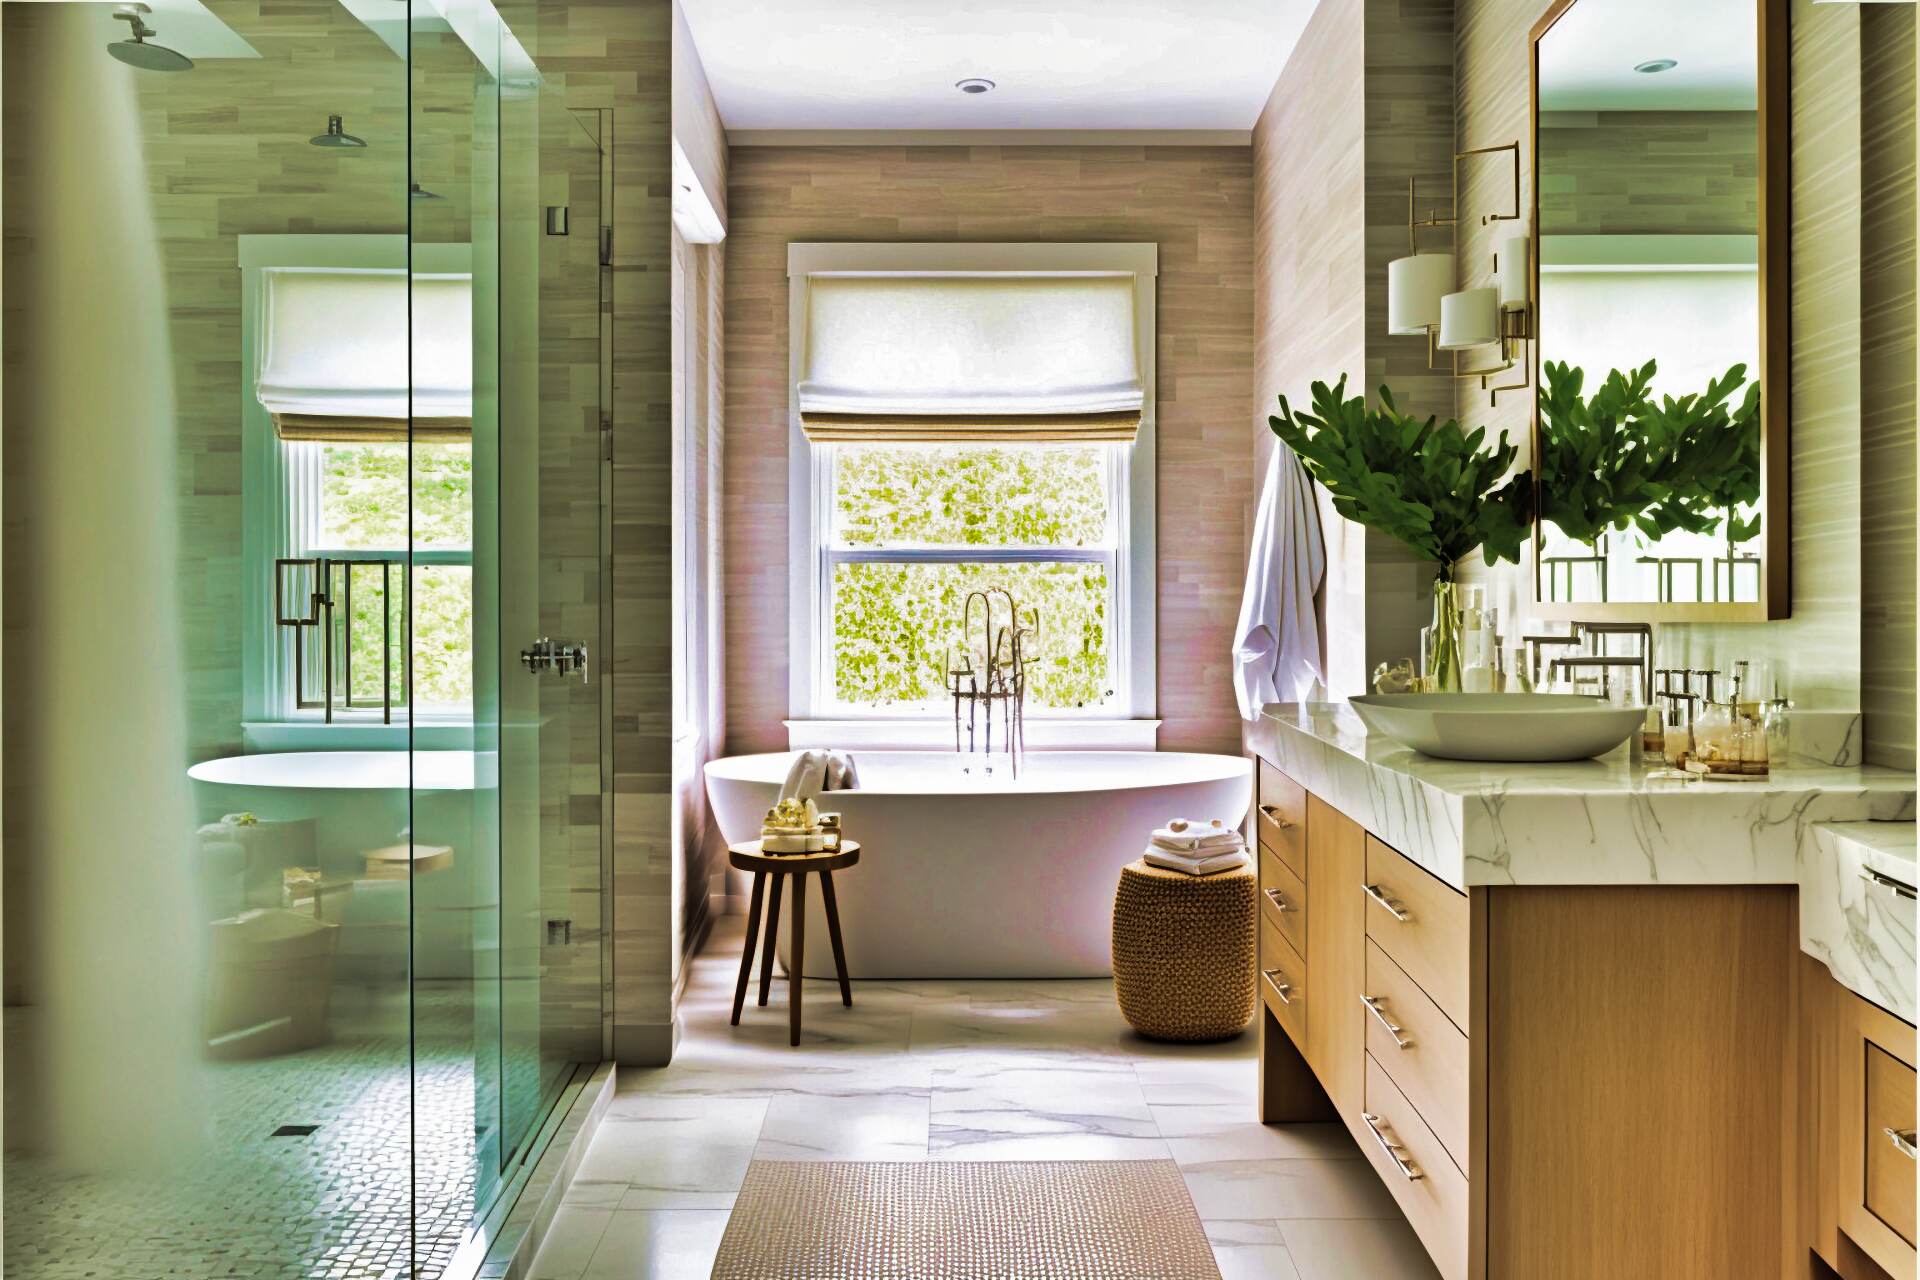 A Modern Bathroom With A Spa-Like Aesthetic. The Space Features A Freestanding Soaking Tub, A Large Walk-In Shower With A Rainfall Showerhead, And A Double Vanity With A Marble Countertop. The Floors Are A Light Wood-Look Tile, And The Walls Are White Subway Tile With A Mix Of Natural Stone Accents. The Room Is Illuminated By Recessed Lighting And Sconces.